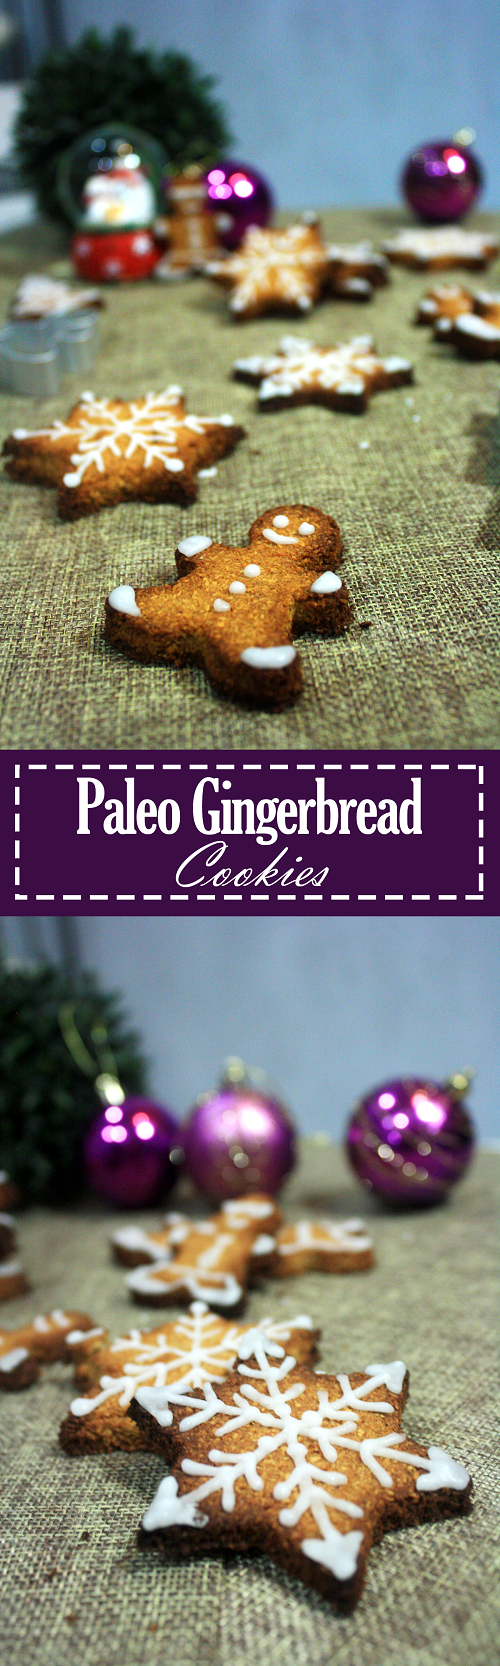 Paleo Gingerbread Cookies with Icing by Summer Day Naturals